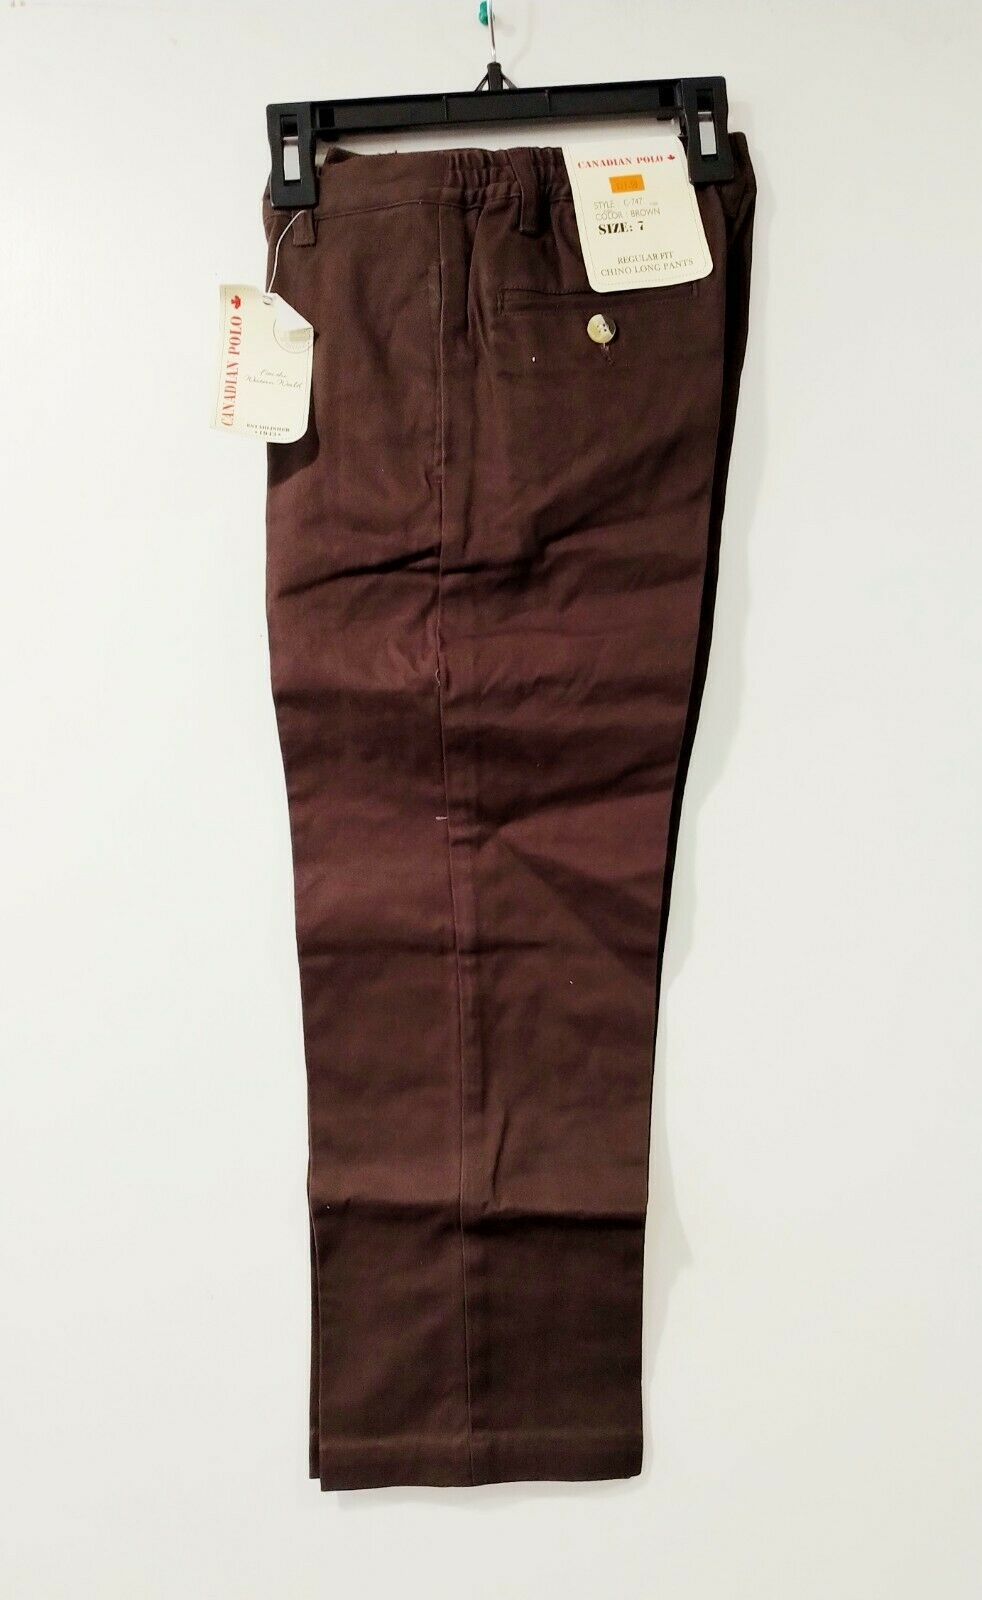 Pants Trousers Kids Teens Canadian Polo Size 7 8 10 12 14 16 18 20 Brown NEW